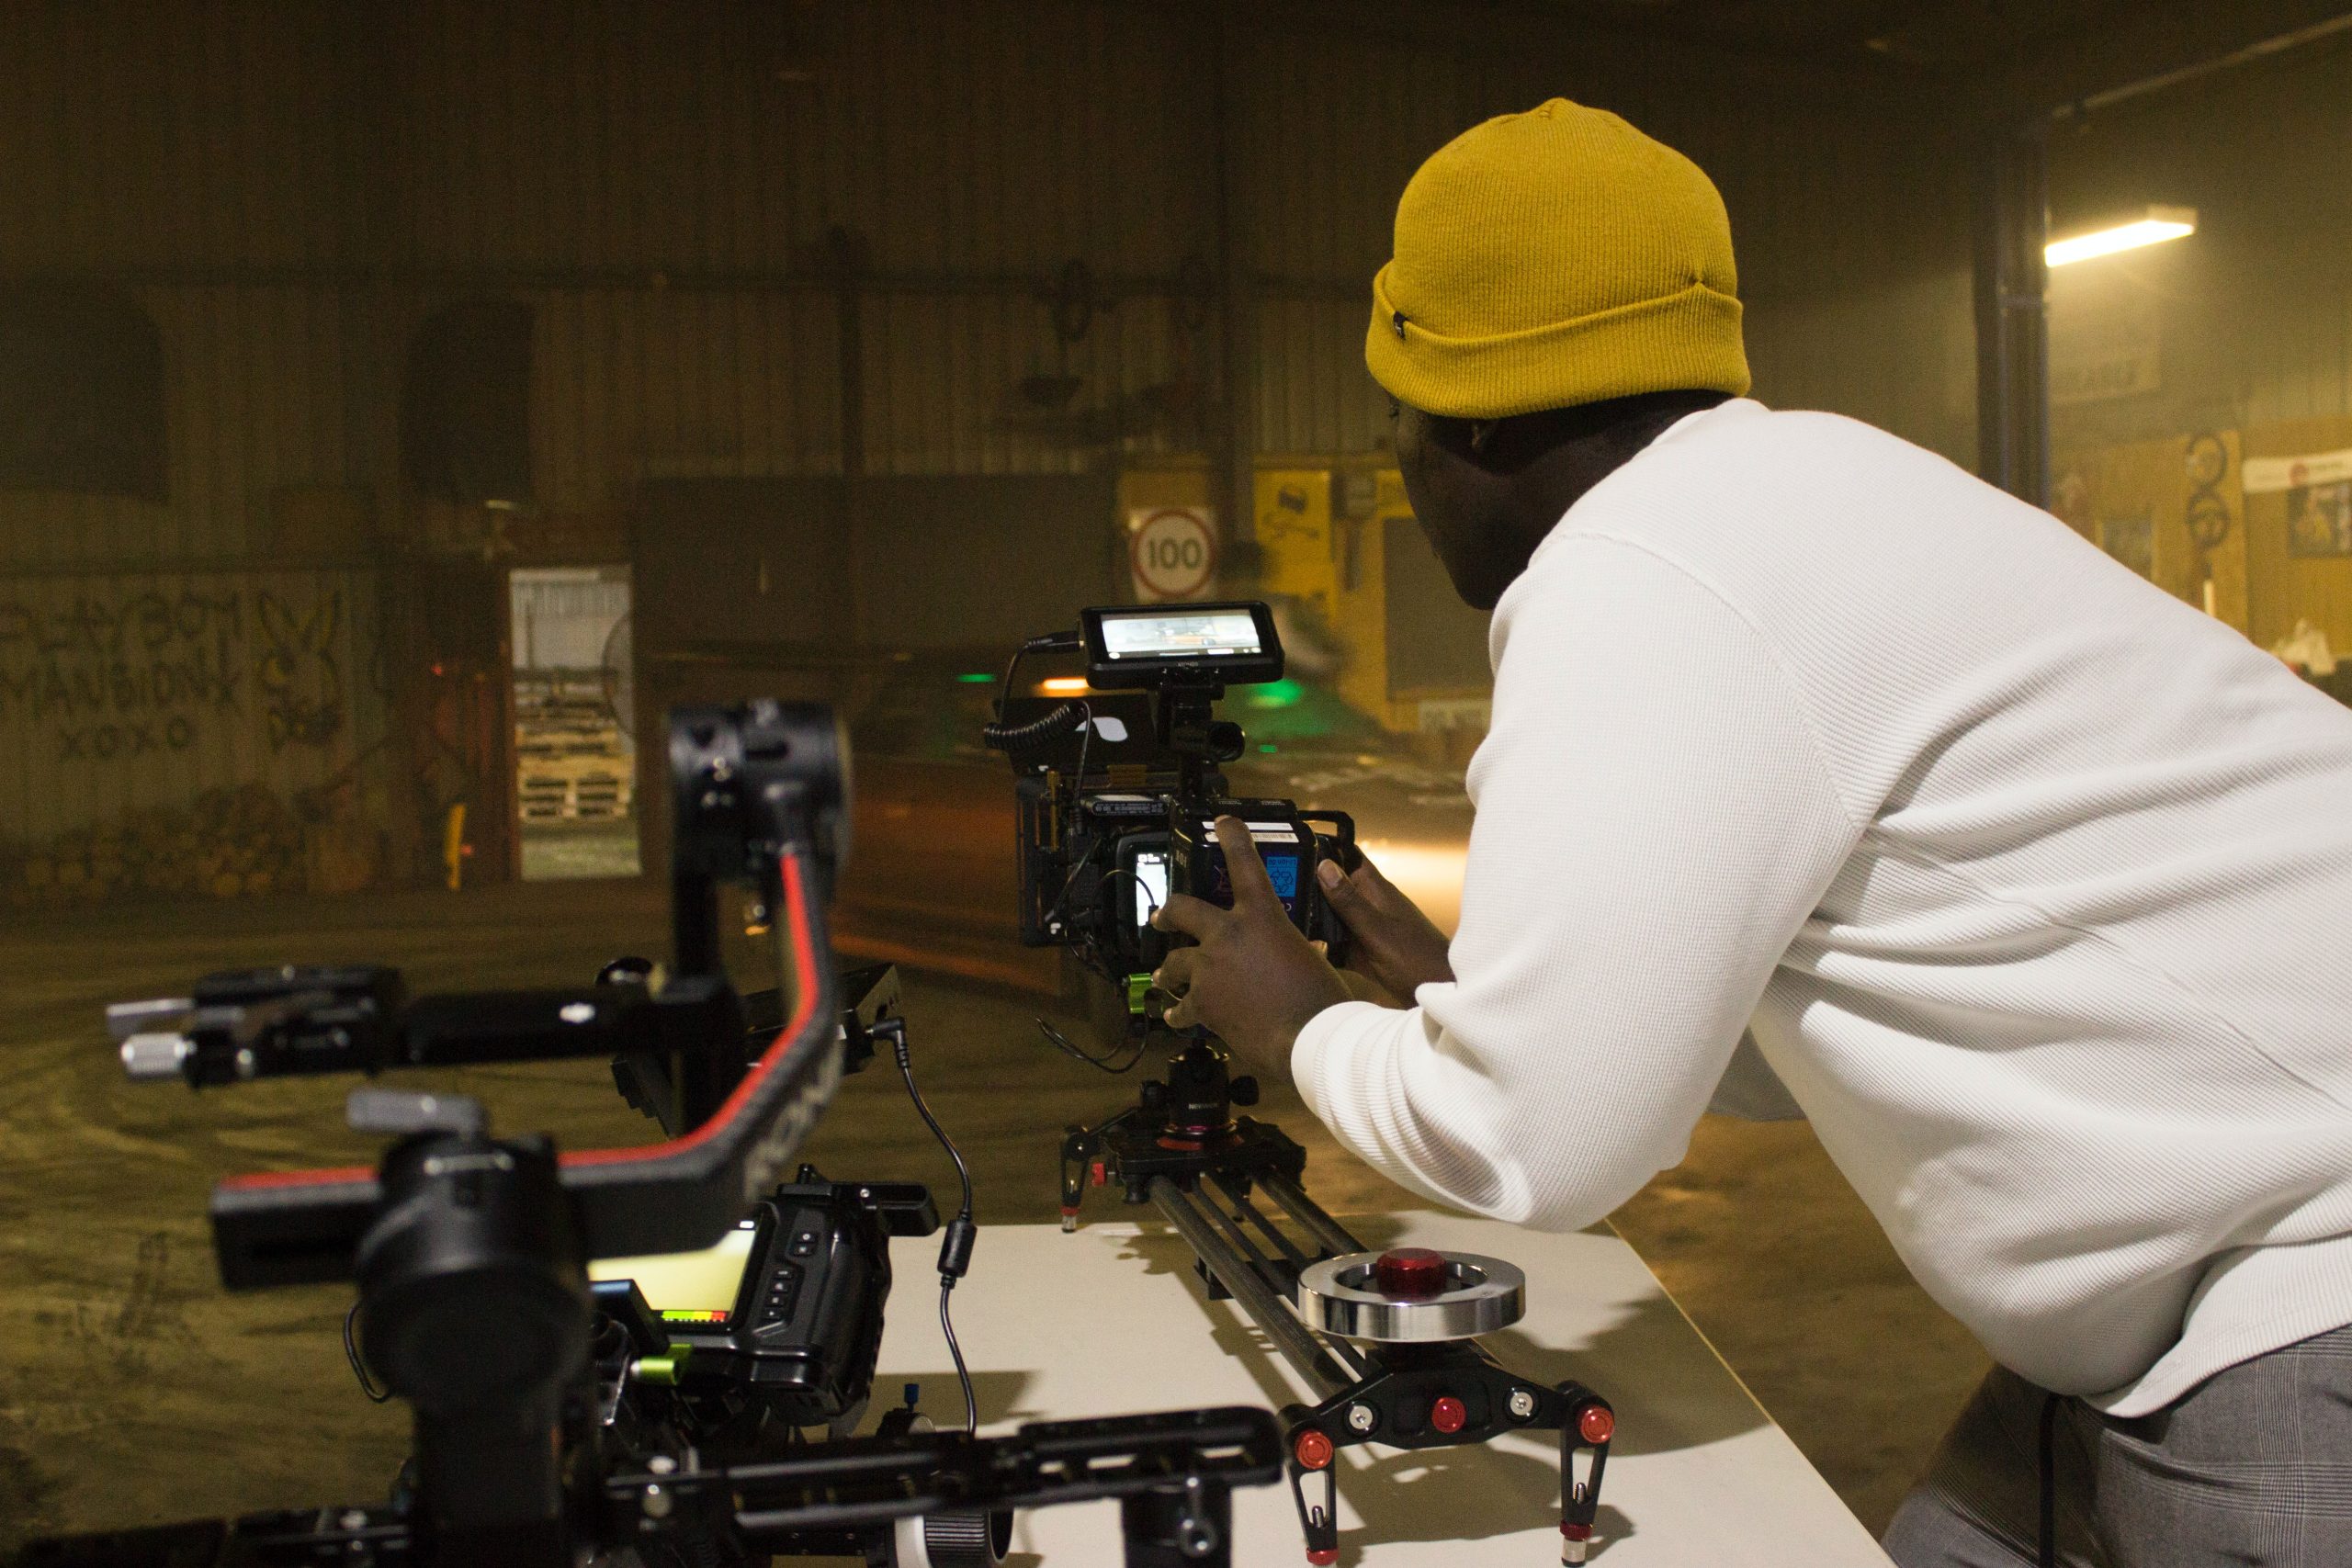 An individual, likely a videographer or filmmaker, operating a professional camera setup, possibly preparing for a video shoot in an industrial or warehouse setting.